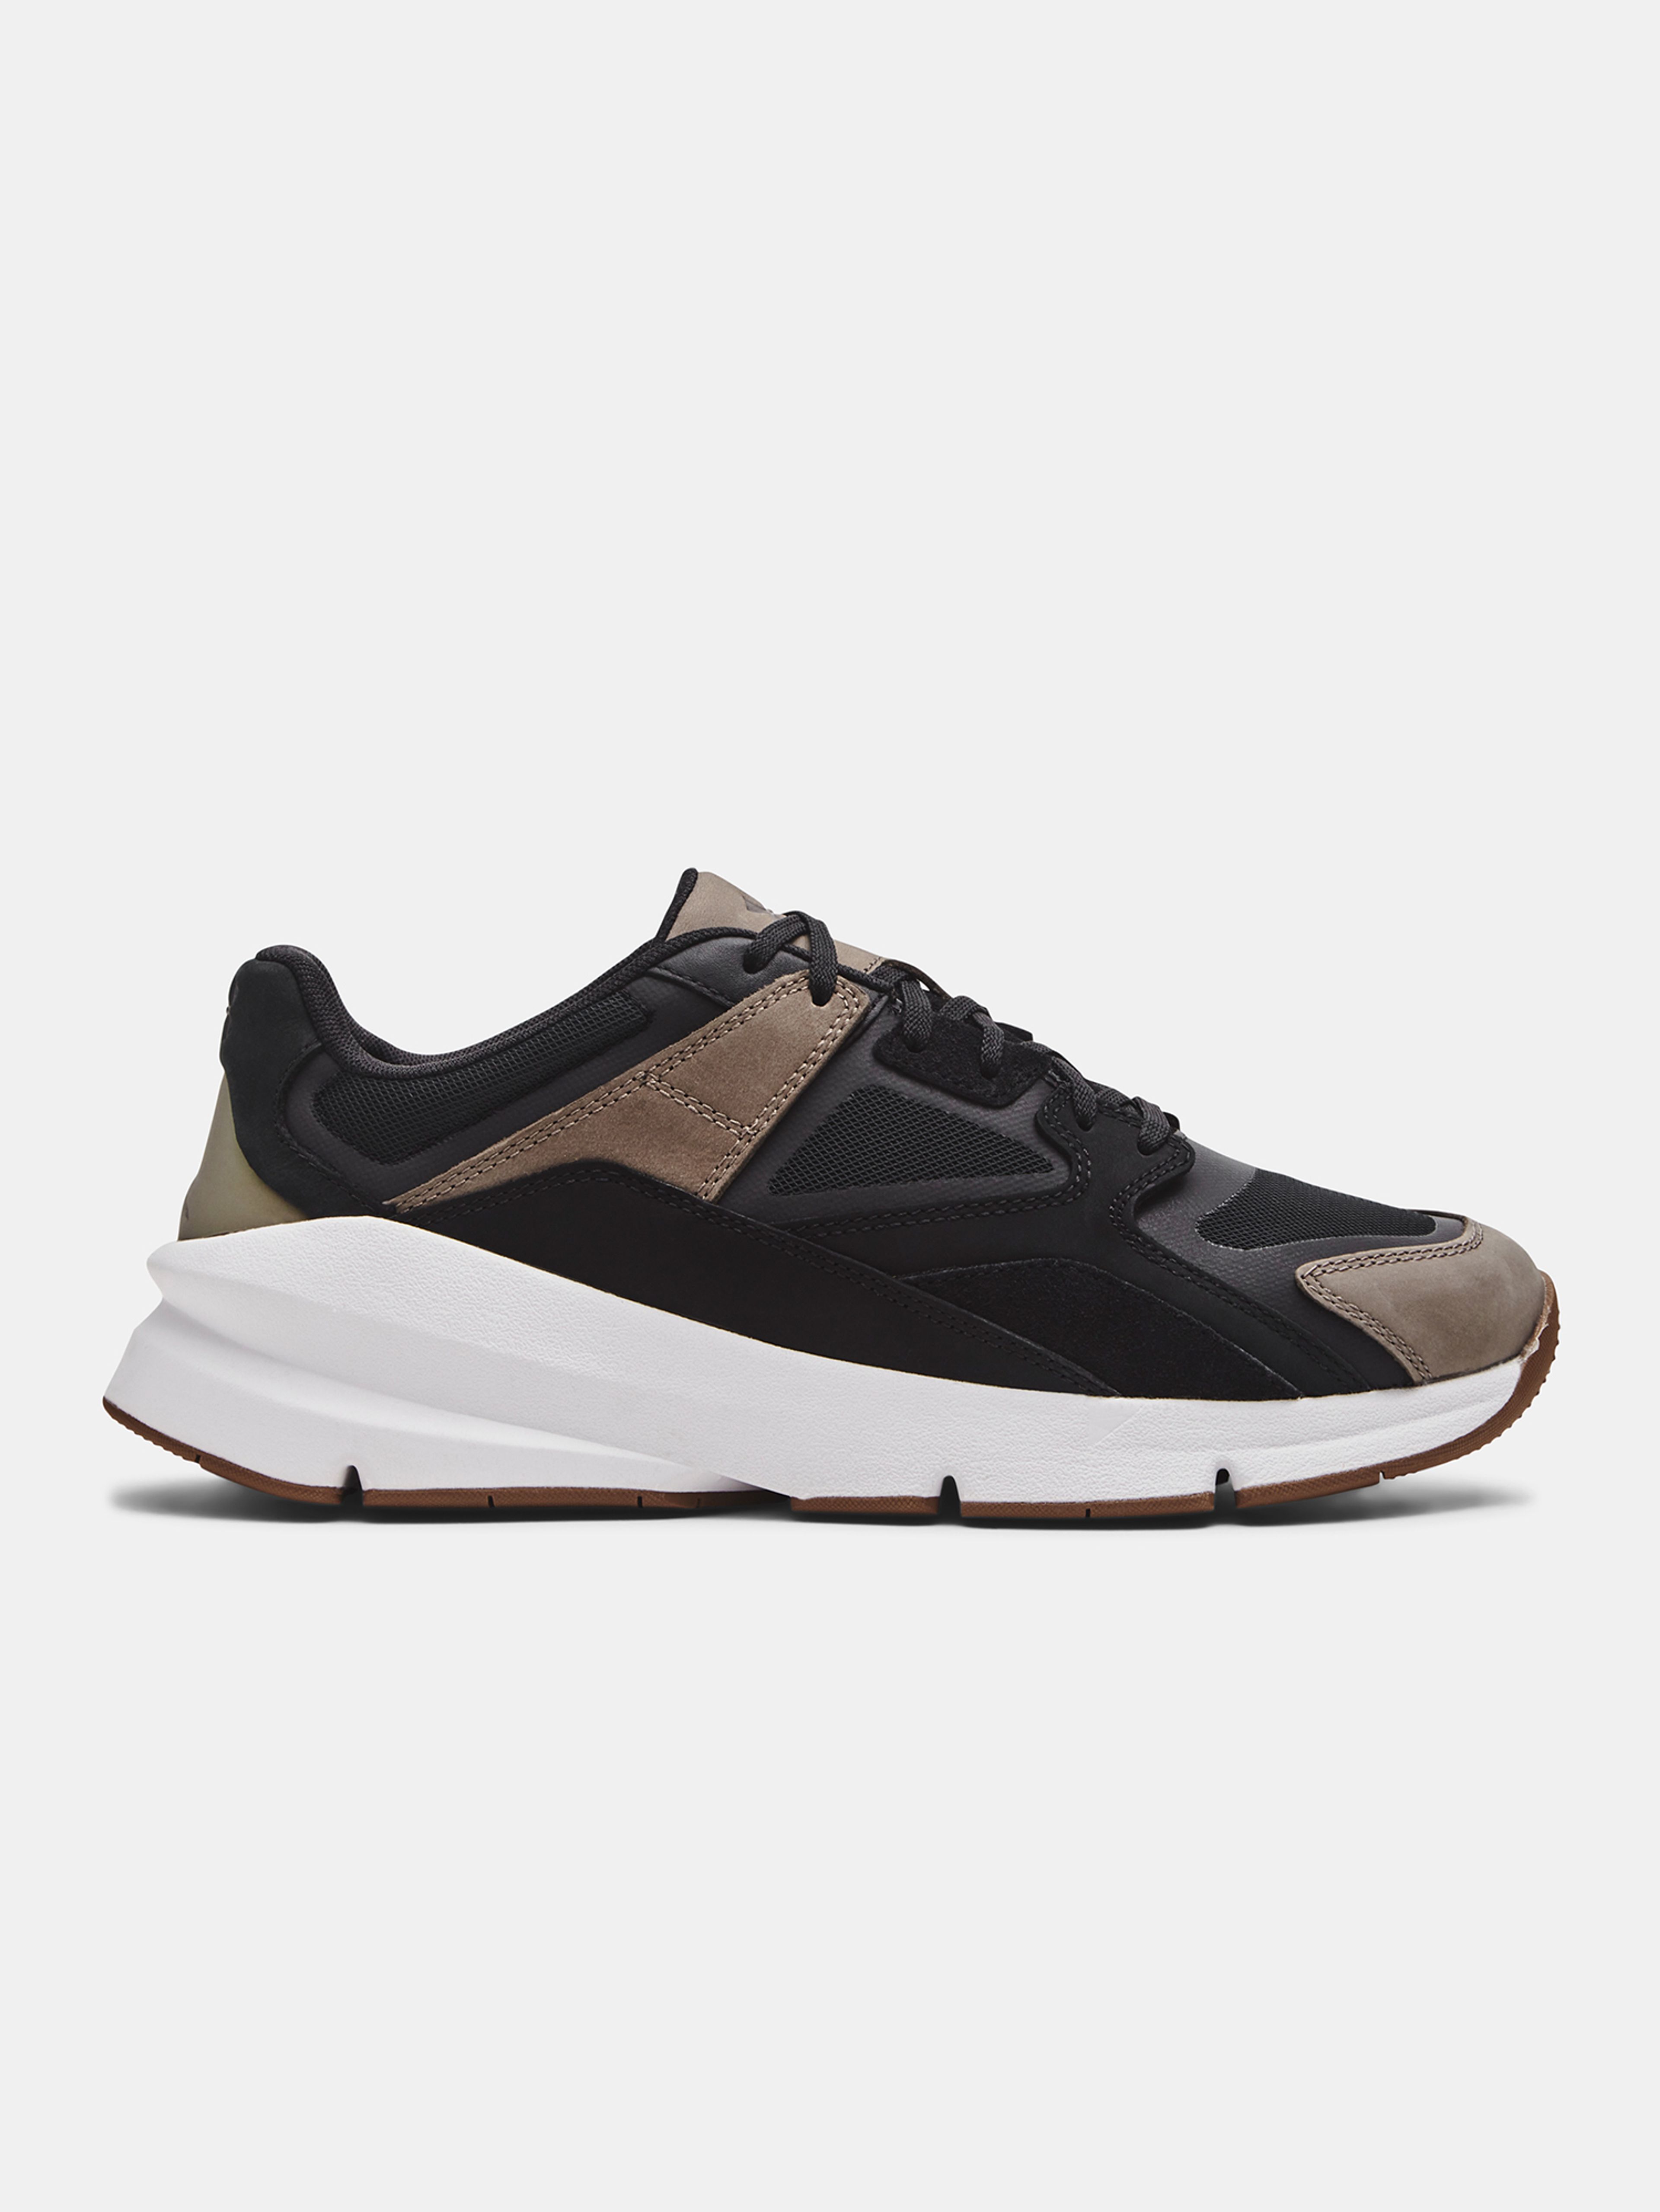 Boty Under Armour UA Forge 96 reissue-BLK